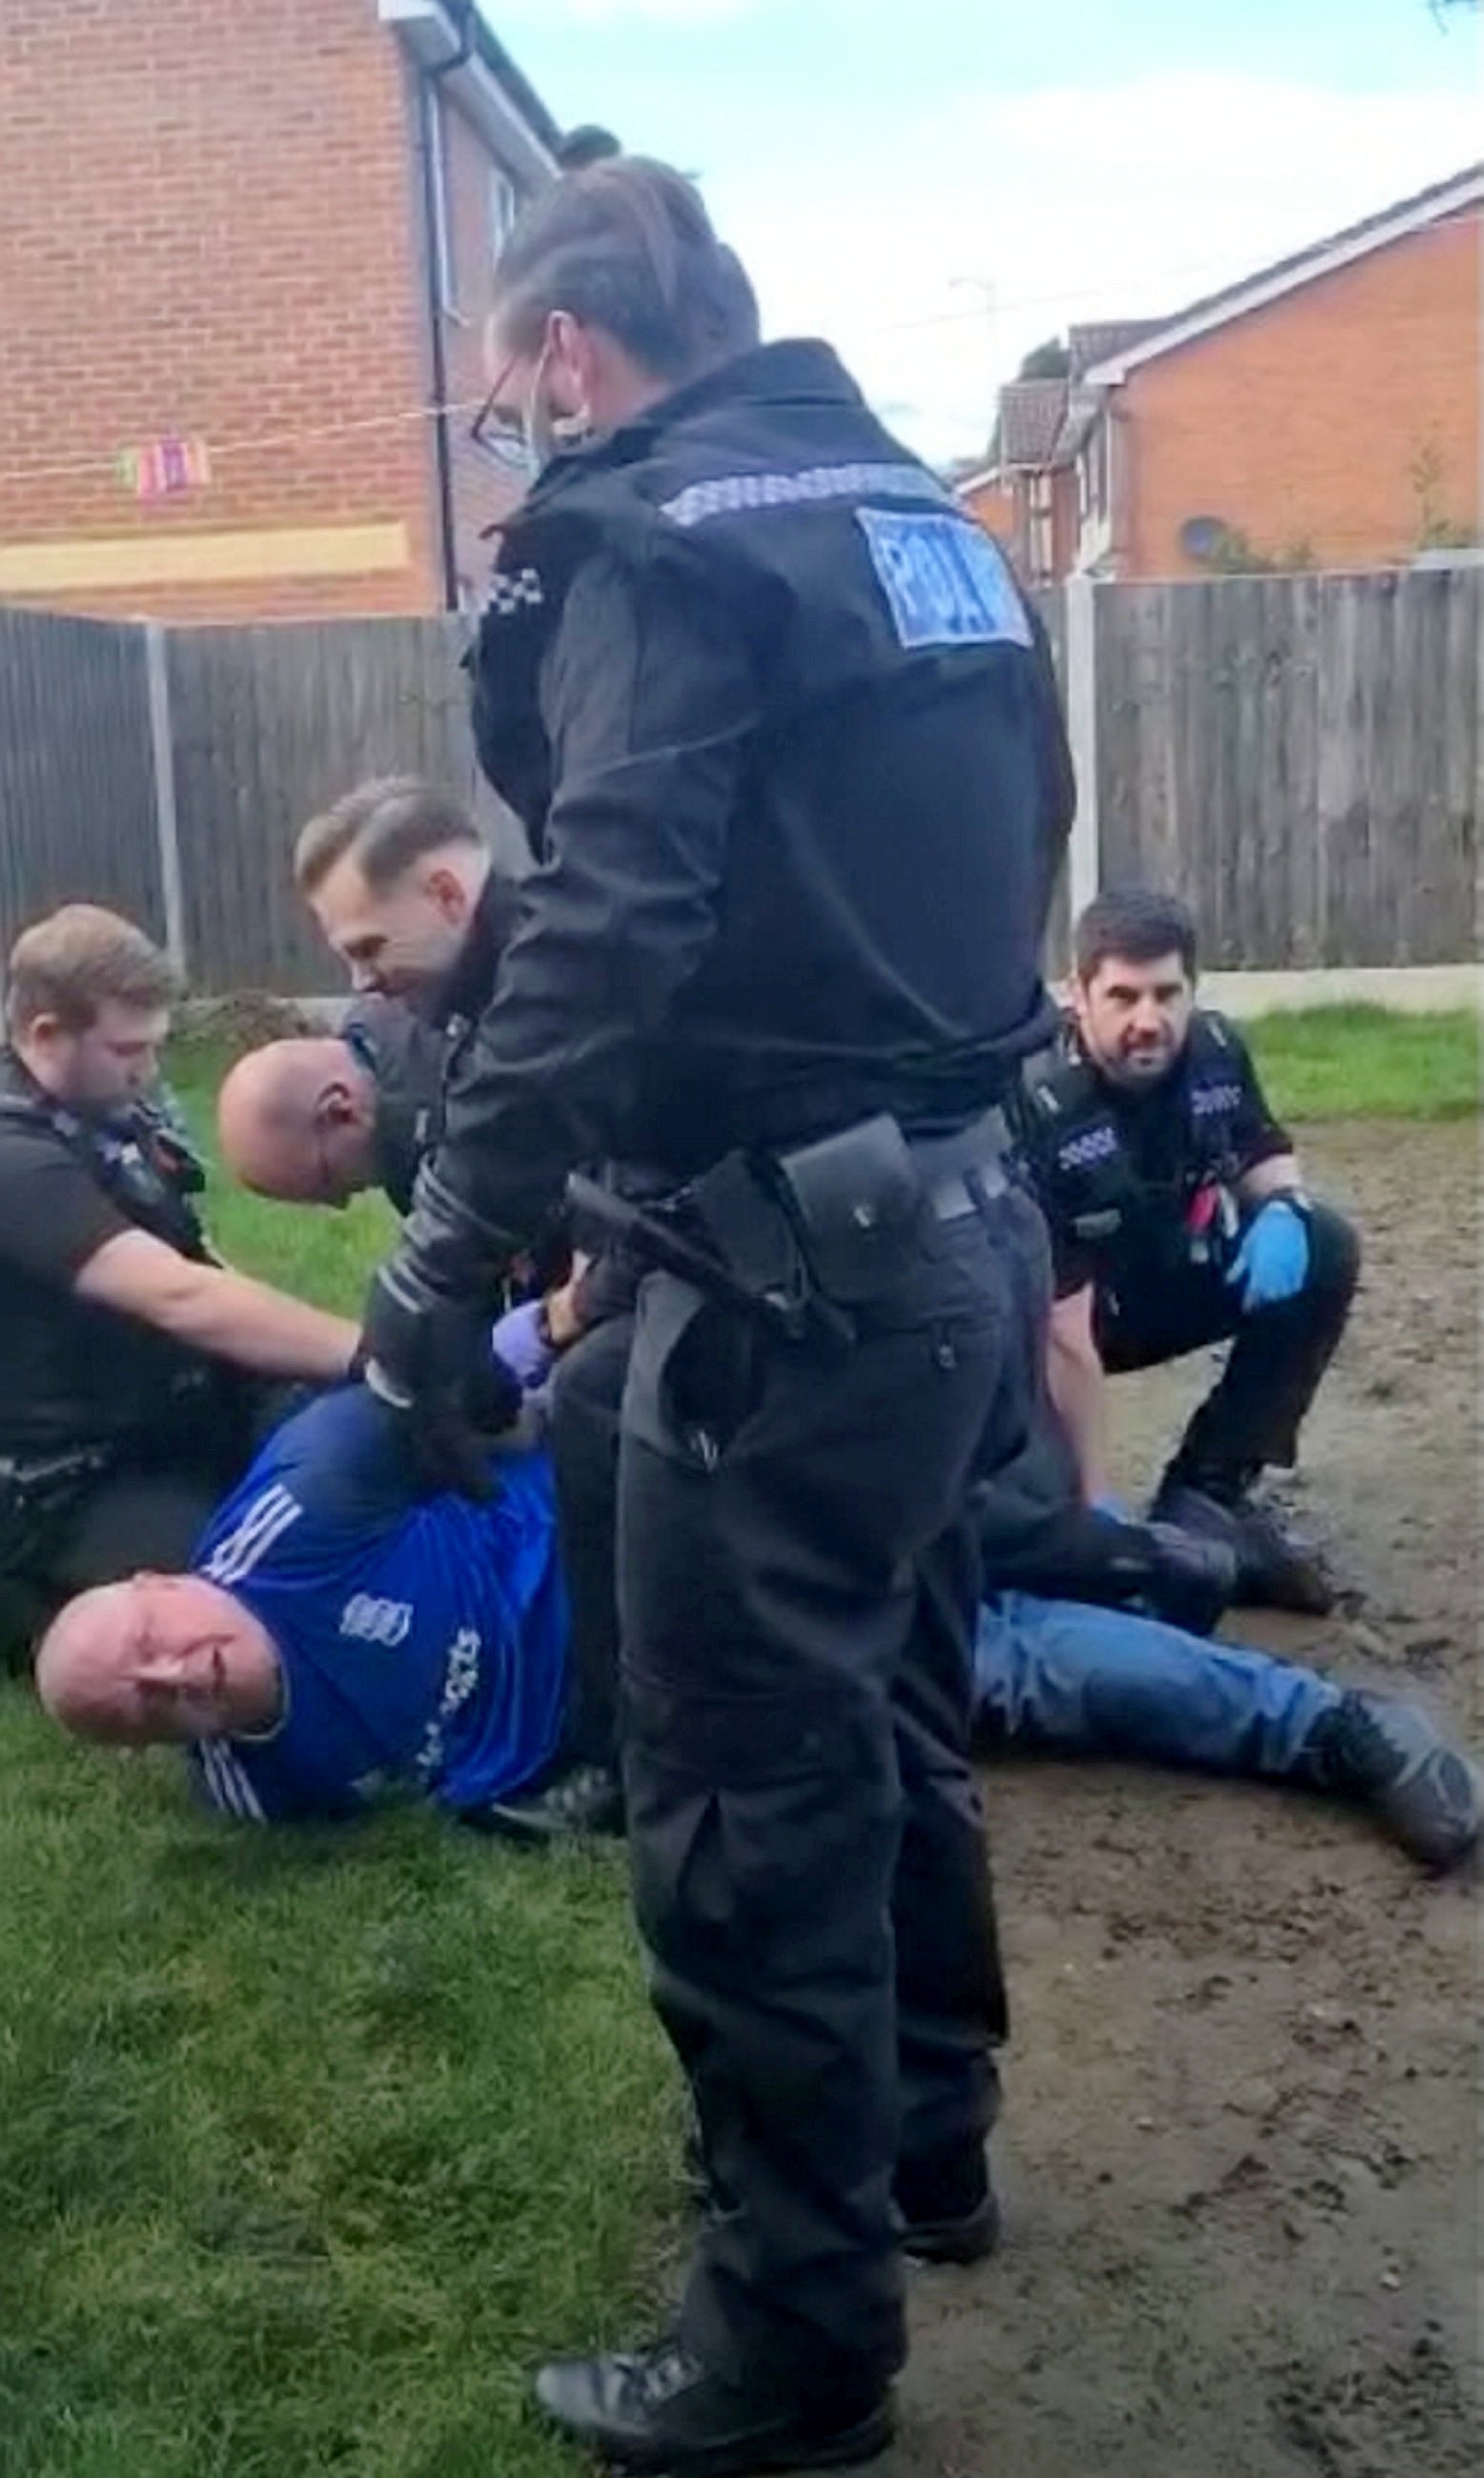 Six police officers arrived at Darrell Meekcoms home to arrest him after flashing a speed camera, wrestling him to the ground